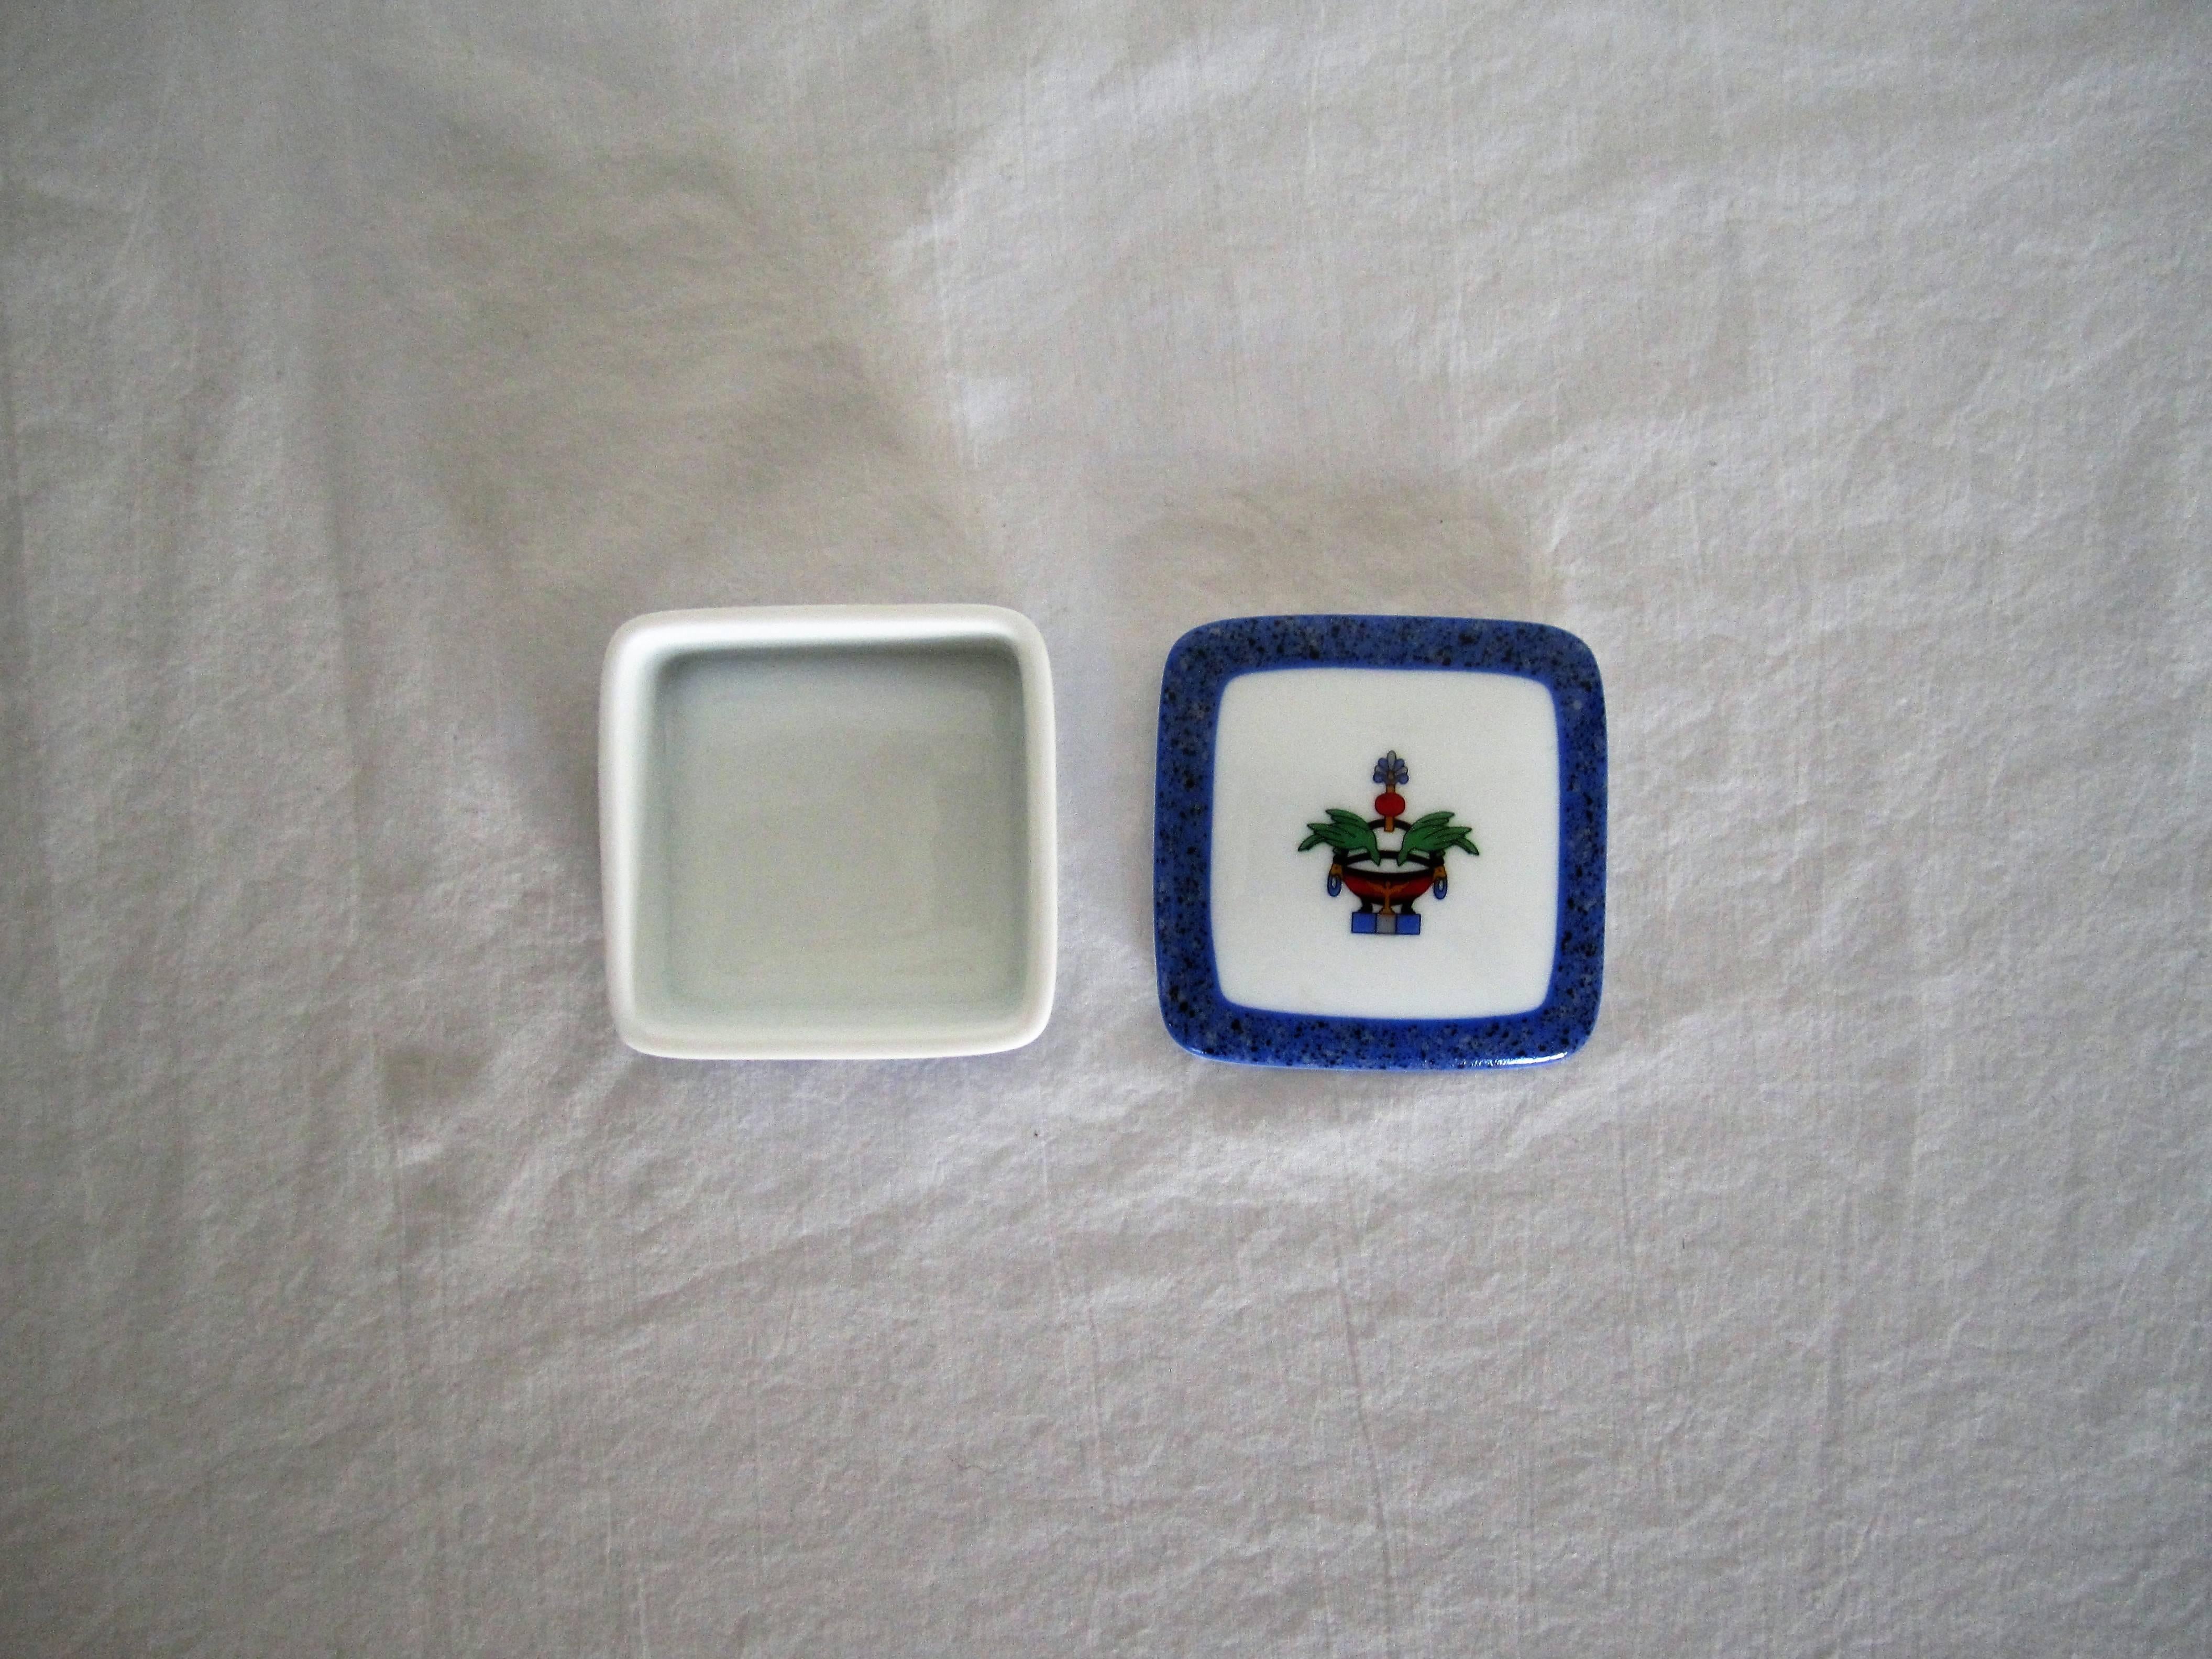 A small Cartier porcelain box made by Limoges. Made in France. With makers mark on bottom as seen in image. A great vanity or bedside box for small items, i.e. earrings, cufflinks, etc. Very good condition, with no chips. Predominant colors include